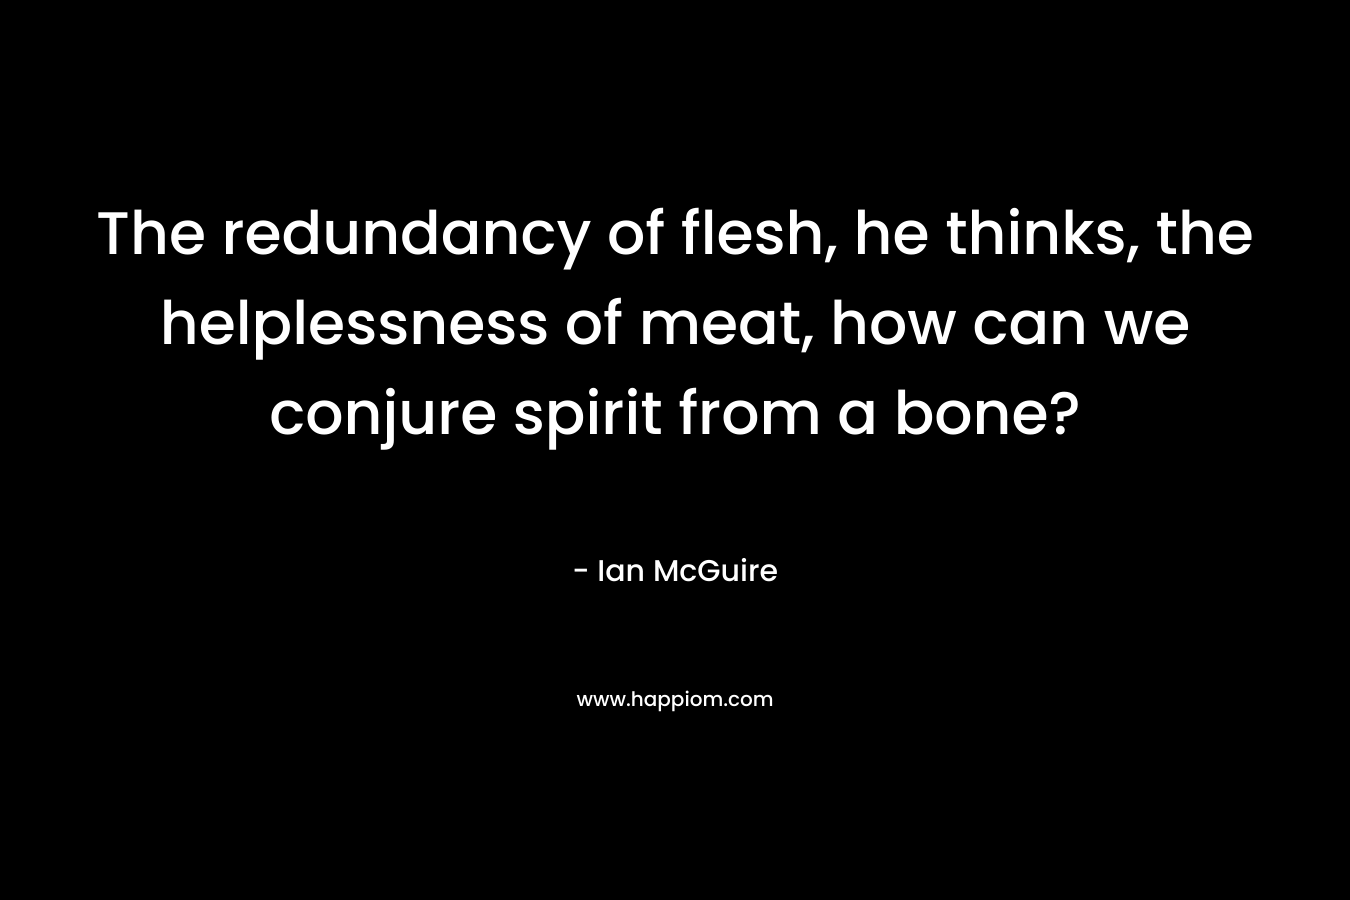 The redundancy of flesh, he thinks, the helplessness of meat, how can we conjure spirit from a bone? – Ian McGuire